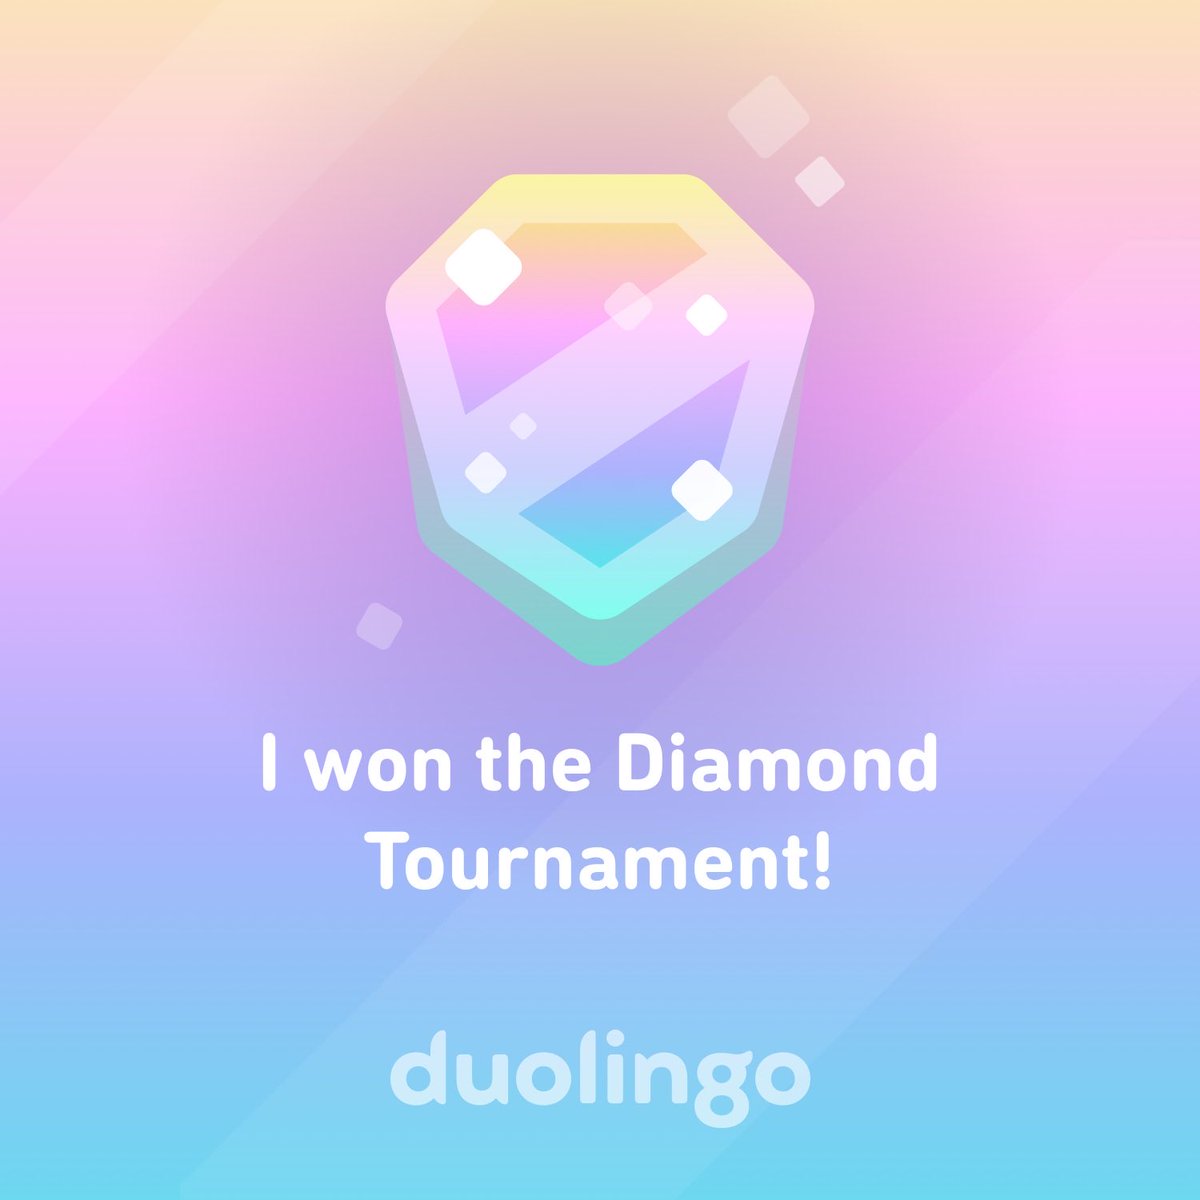 I won the Diamond Tournament on Duolingo! It’s free, fun, and effective for learning languages. 🫰🏻🇰🇷🎉